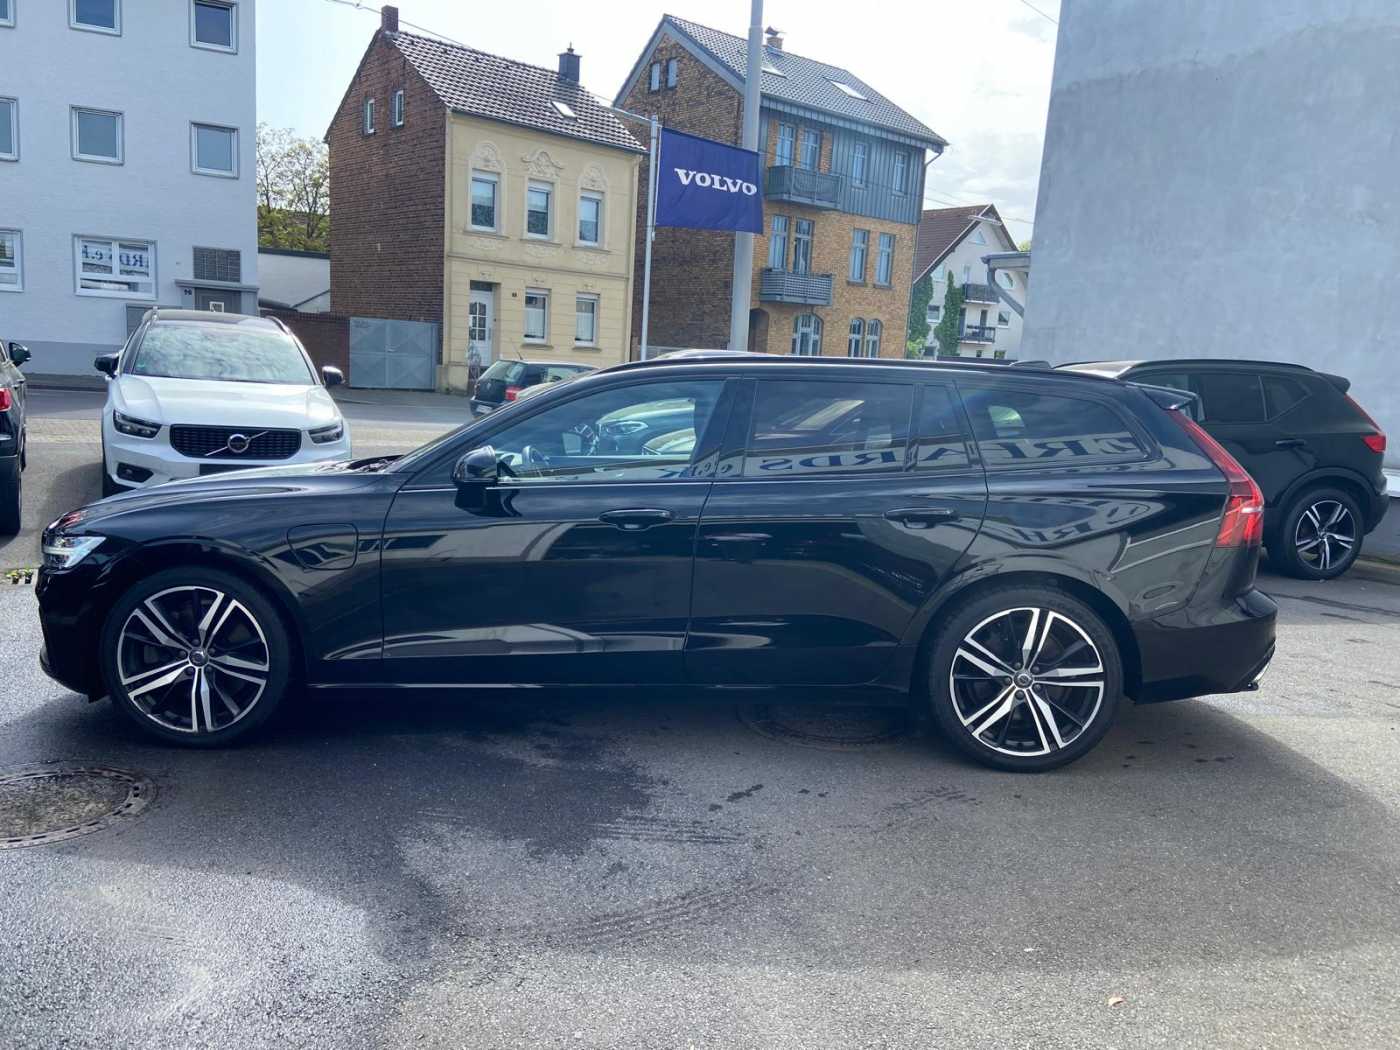 Volvo  V60 T6 TWIN ENGINE AWD Automatikgetriebe (186+65kW/253+87PS) R-Design